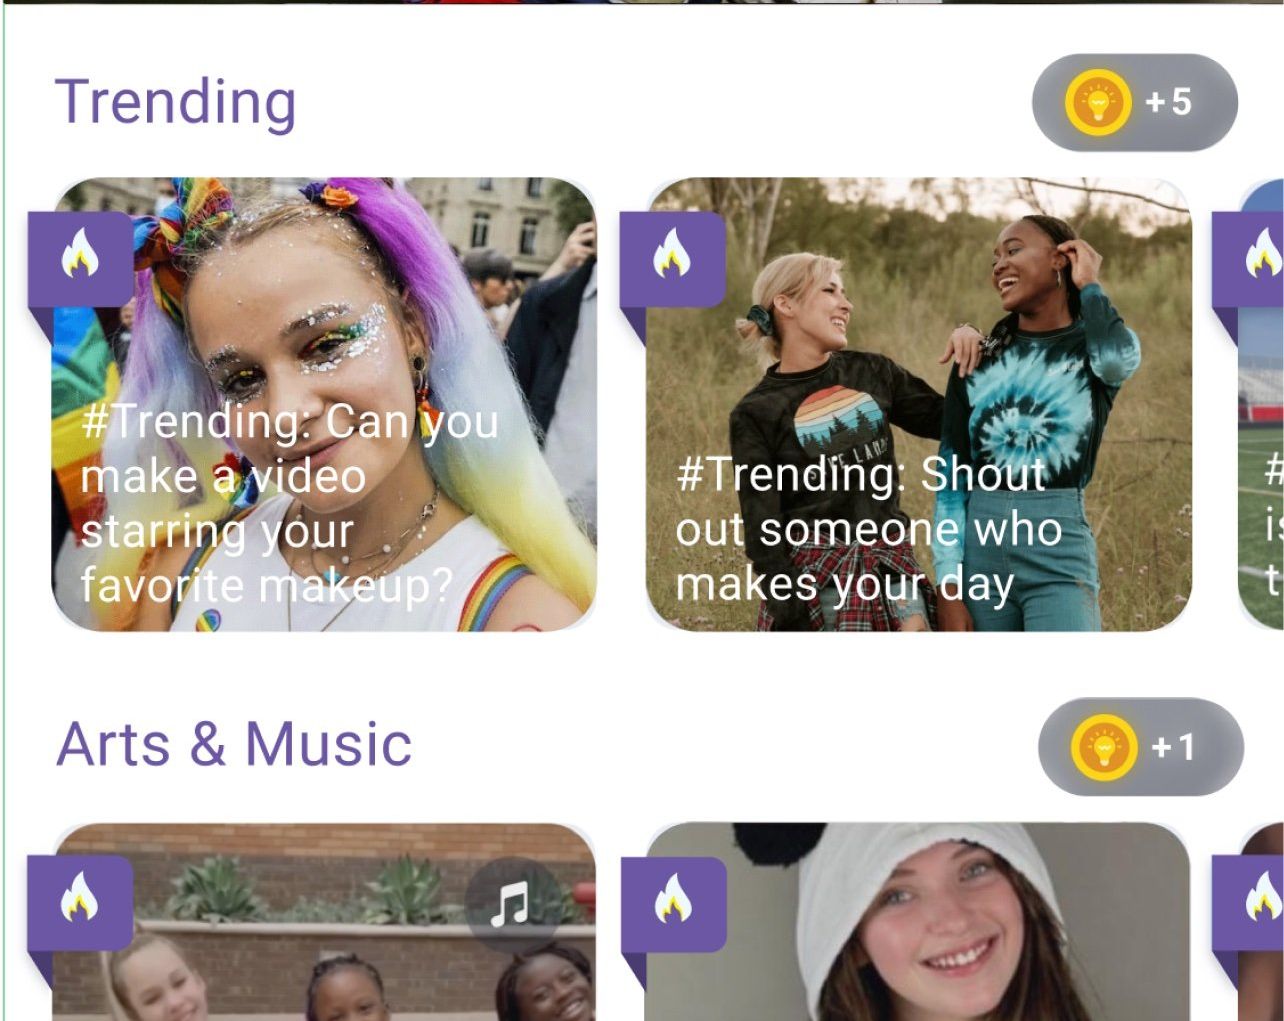 With a TikTok Ban on the Horizon, Zigazoo Is Working To Attract Teens